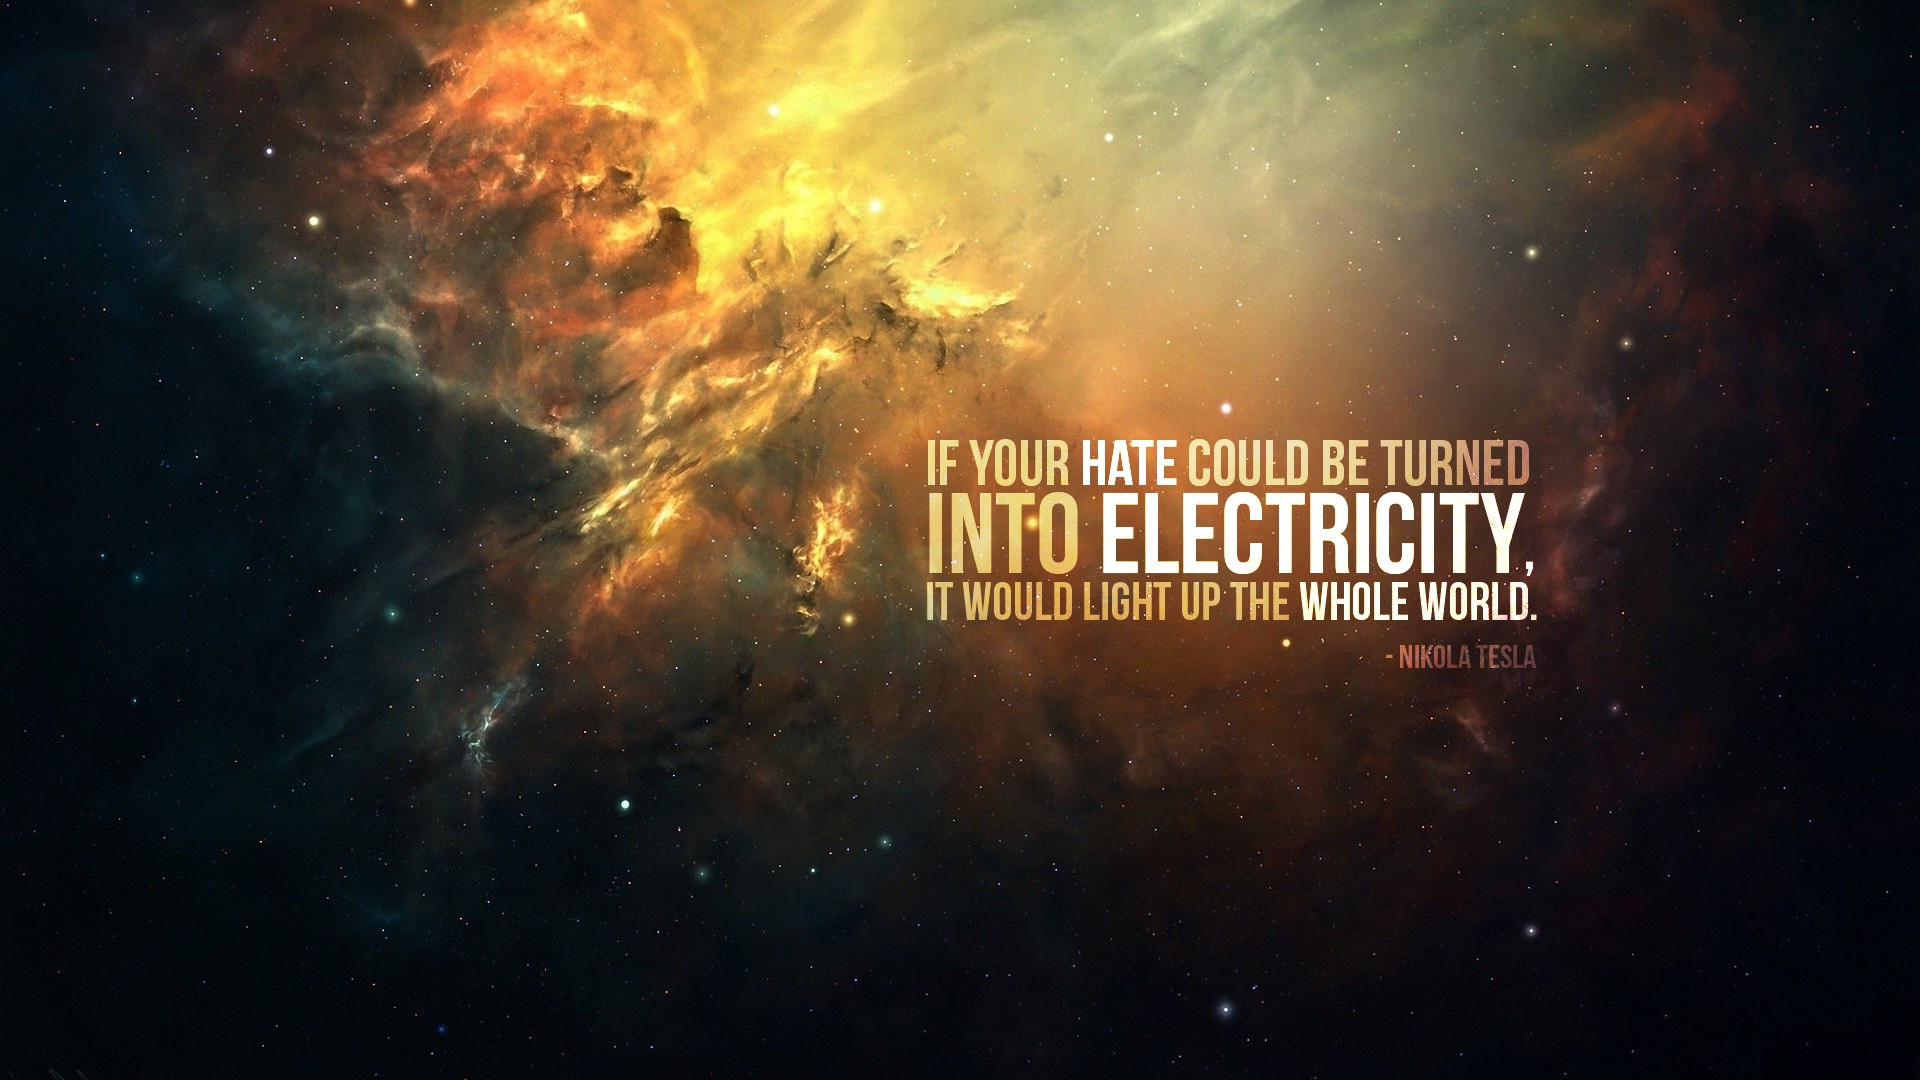 Http - If Your Hate Could Be Turned Into Electricity It Would - HD Wallpaper 